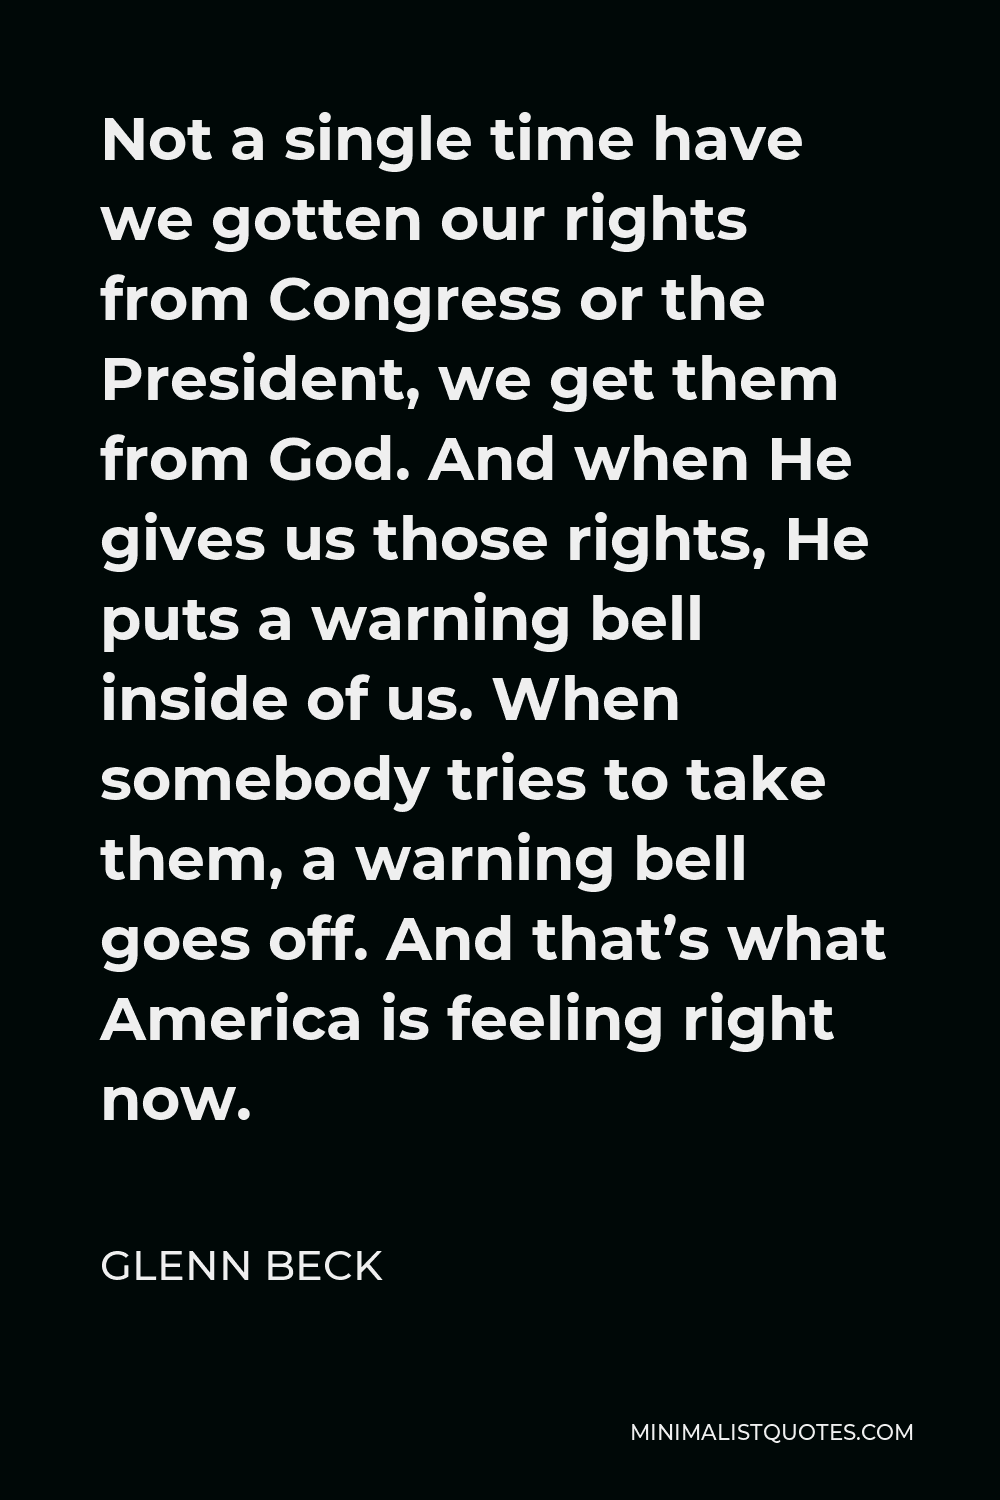 Glenn Beck Quote - Not a single time have we gotten our rights from Congress or the President, we get them from God. And when He gives us those rights, He puts a warning bell inside of us. When somebody tries to take them, a warning bell goes off. And that’s what America is feeling right now.